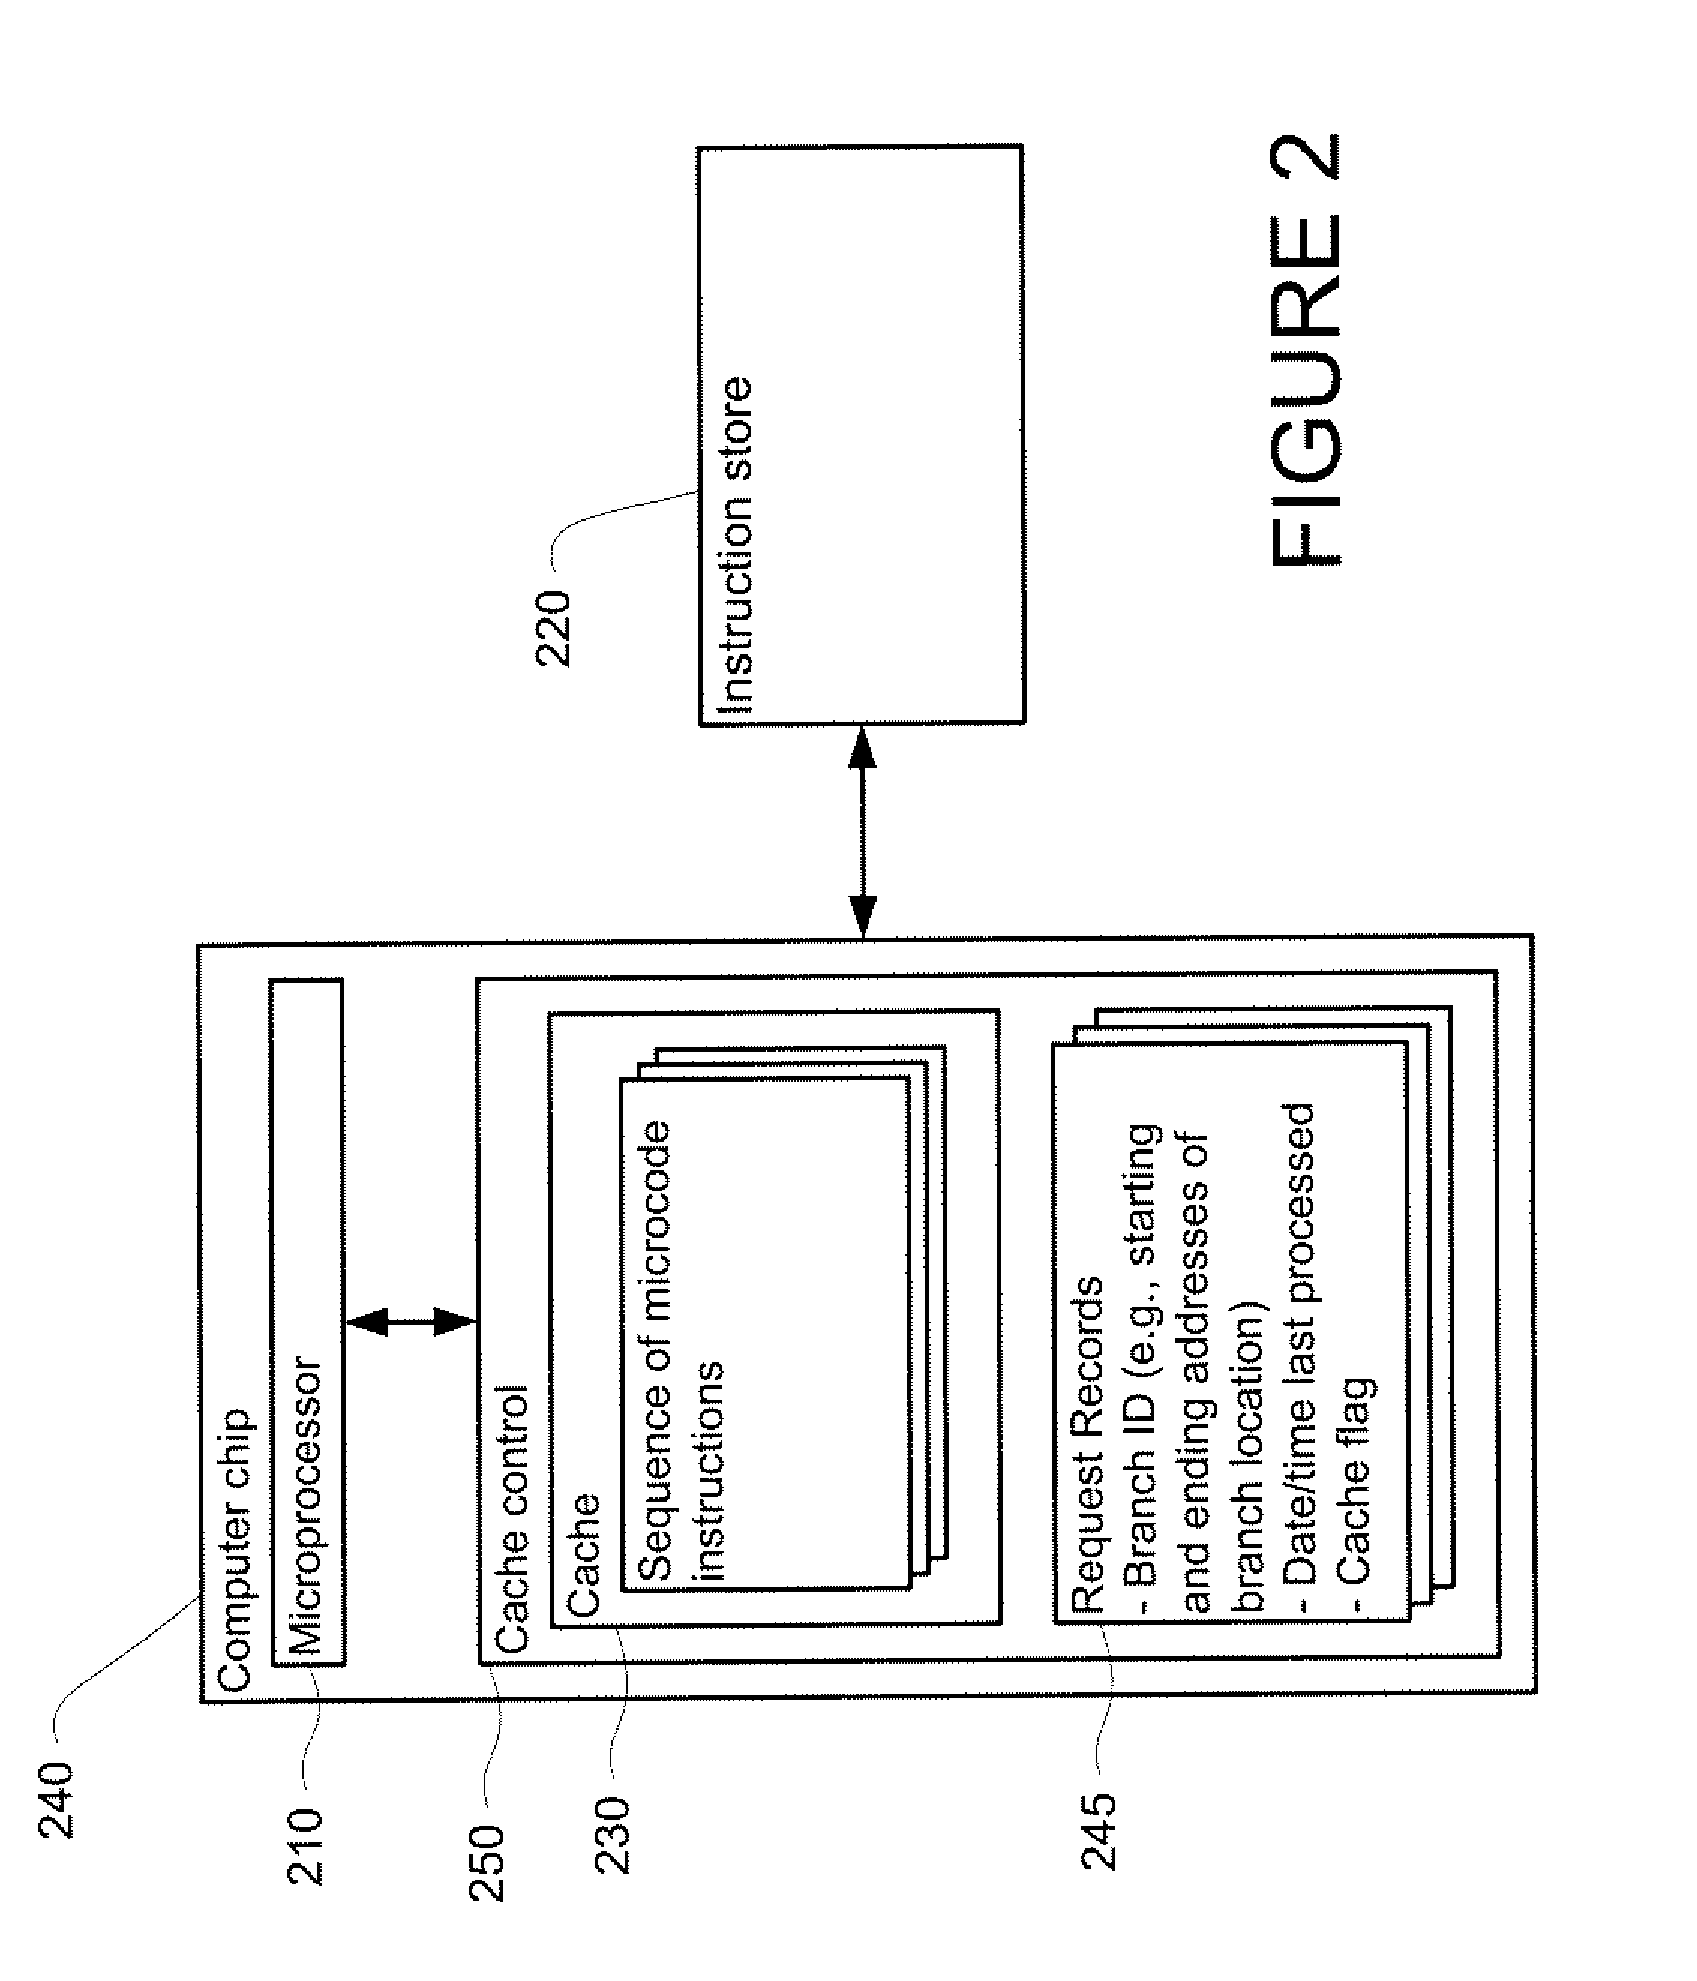 System and method of caching information